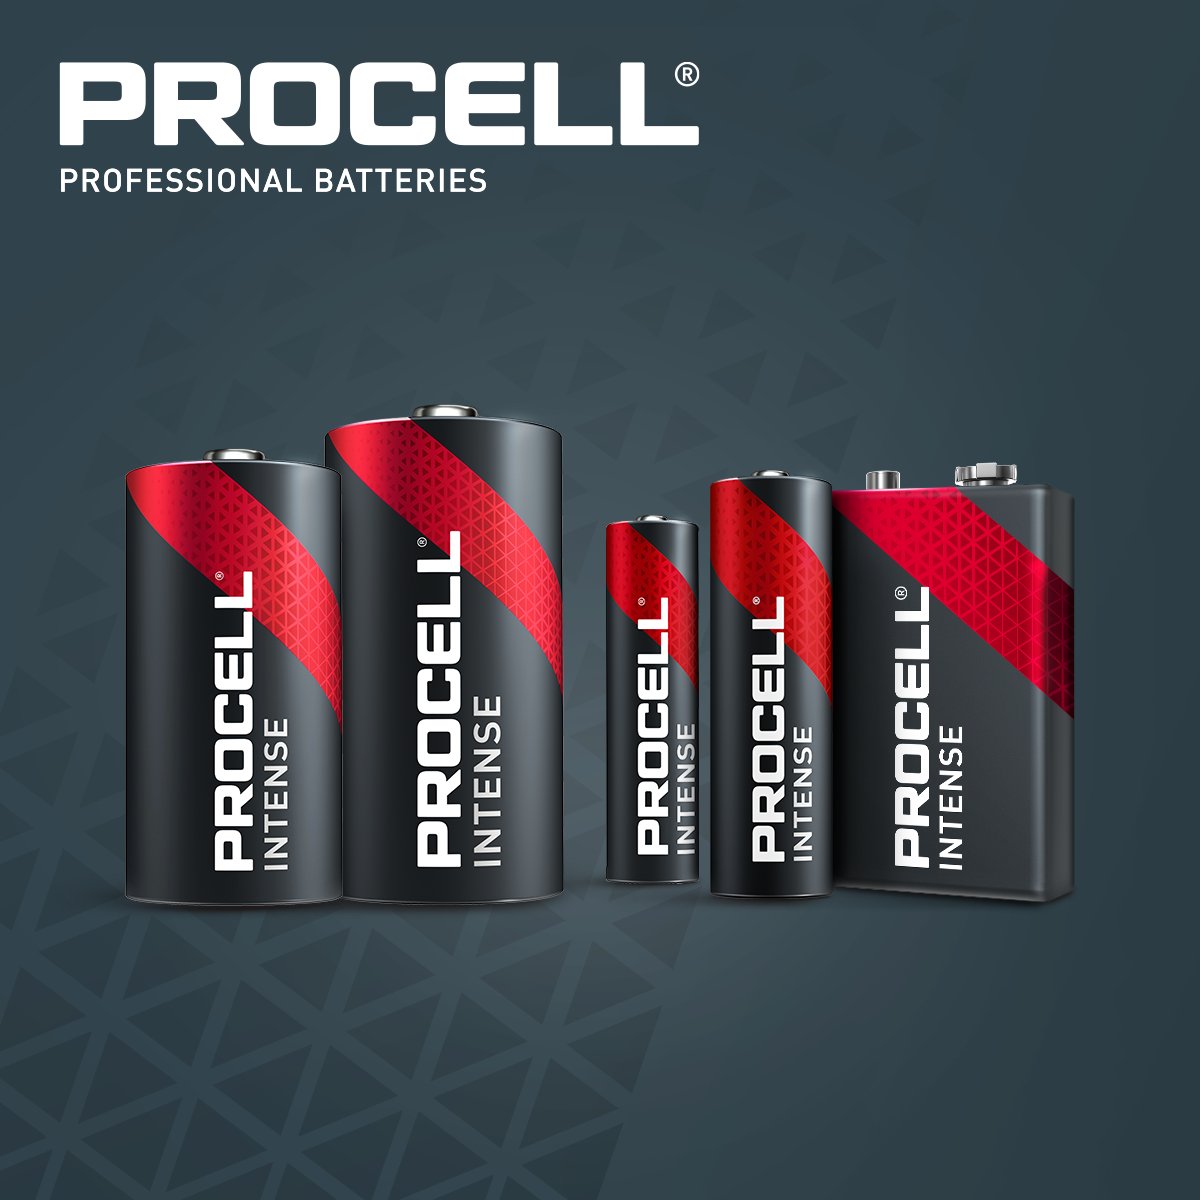 PROCELL INTENSE FAMILY